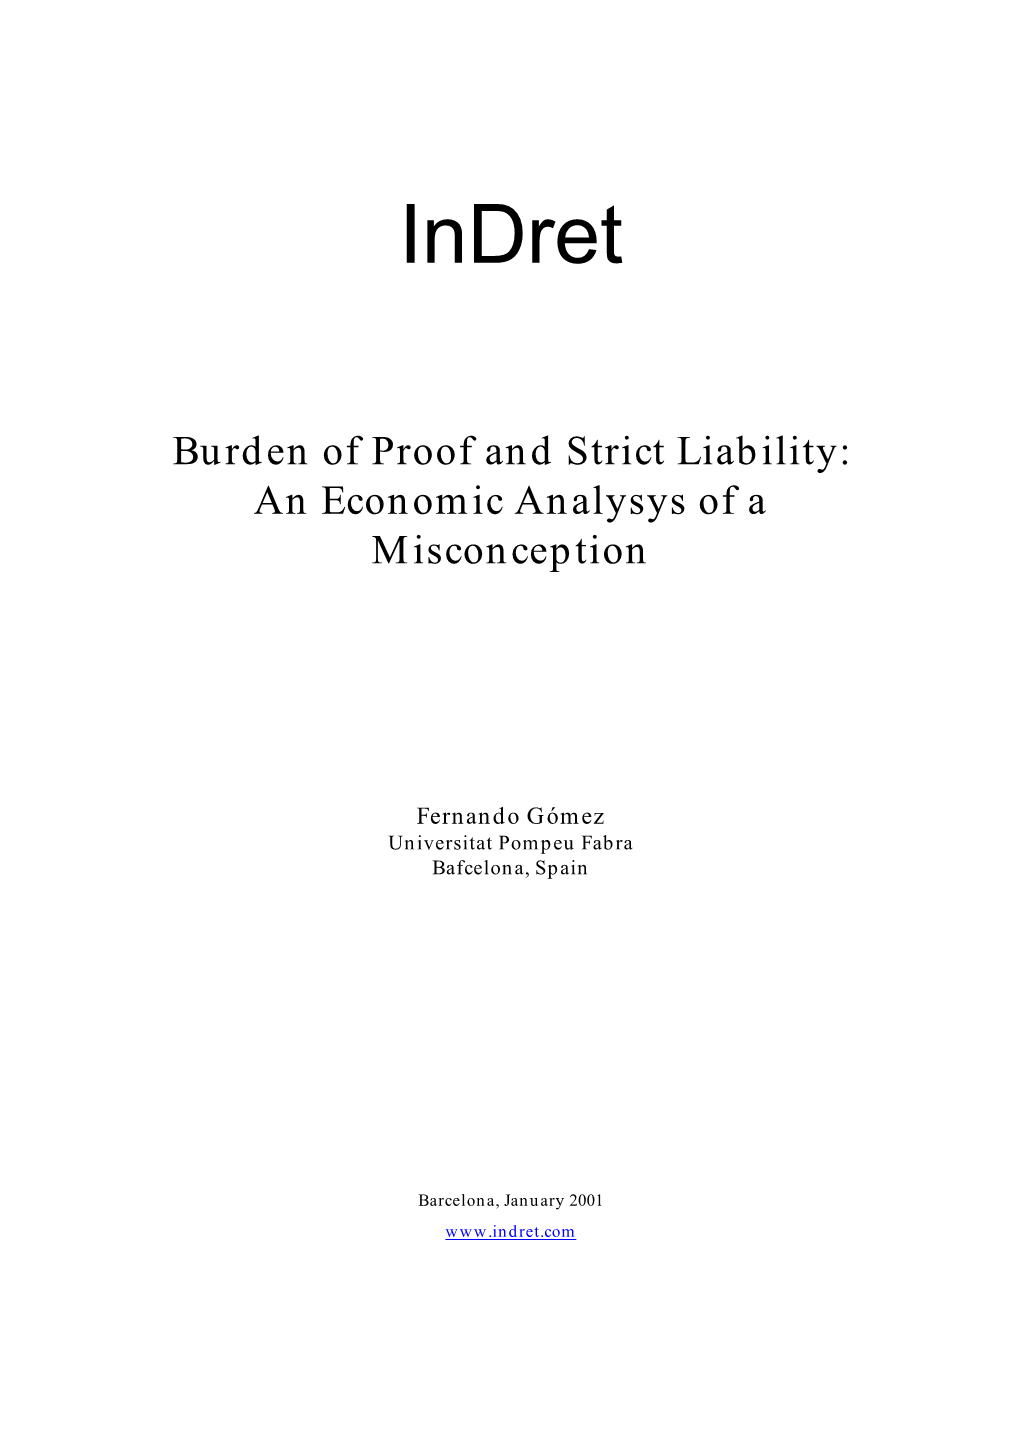 Burden of Proof and Strict Liability: an Economic Analysys of a Misconception